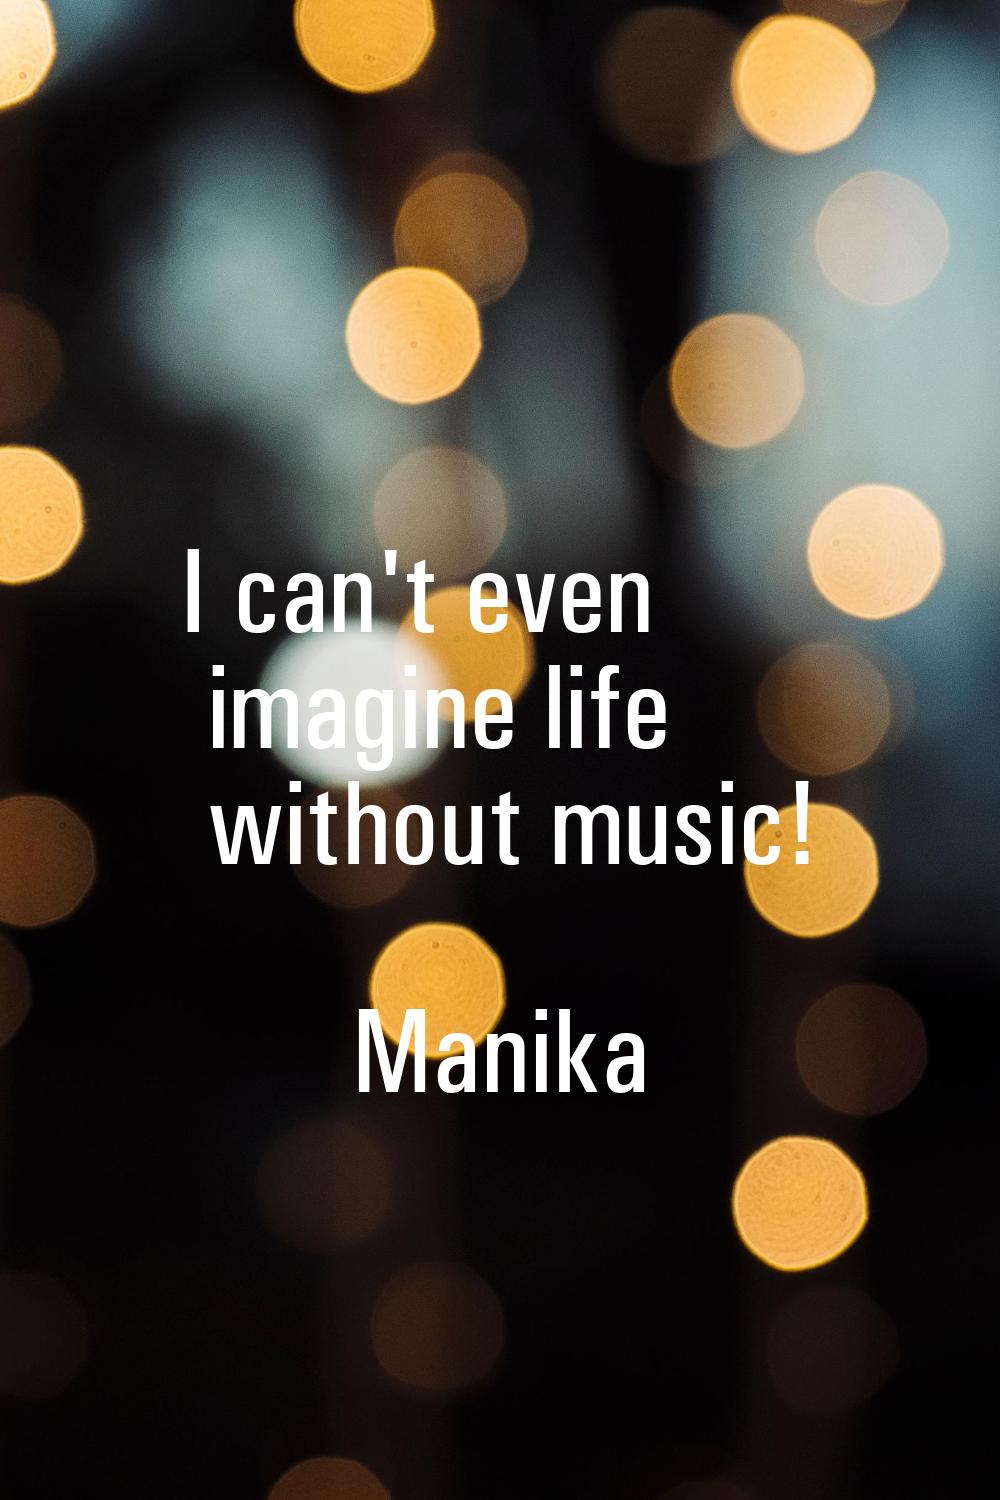 I can't even imagine life without music!